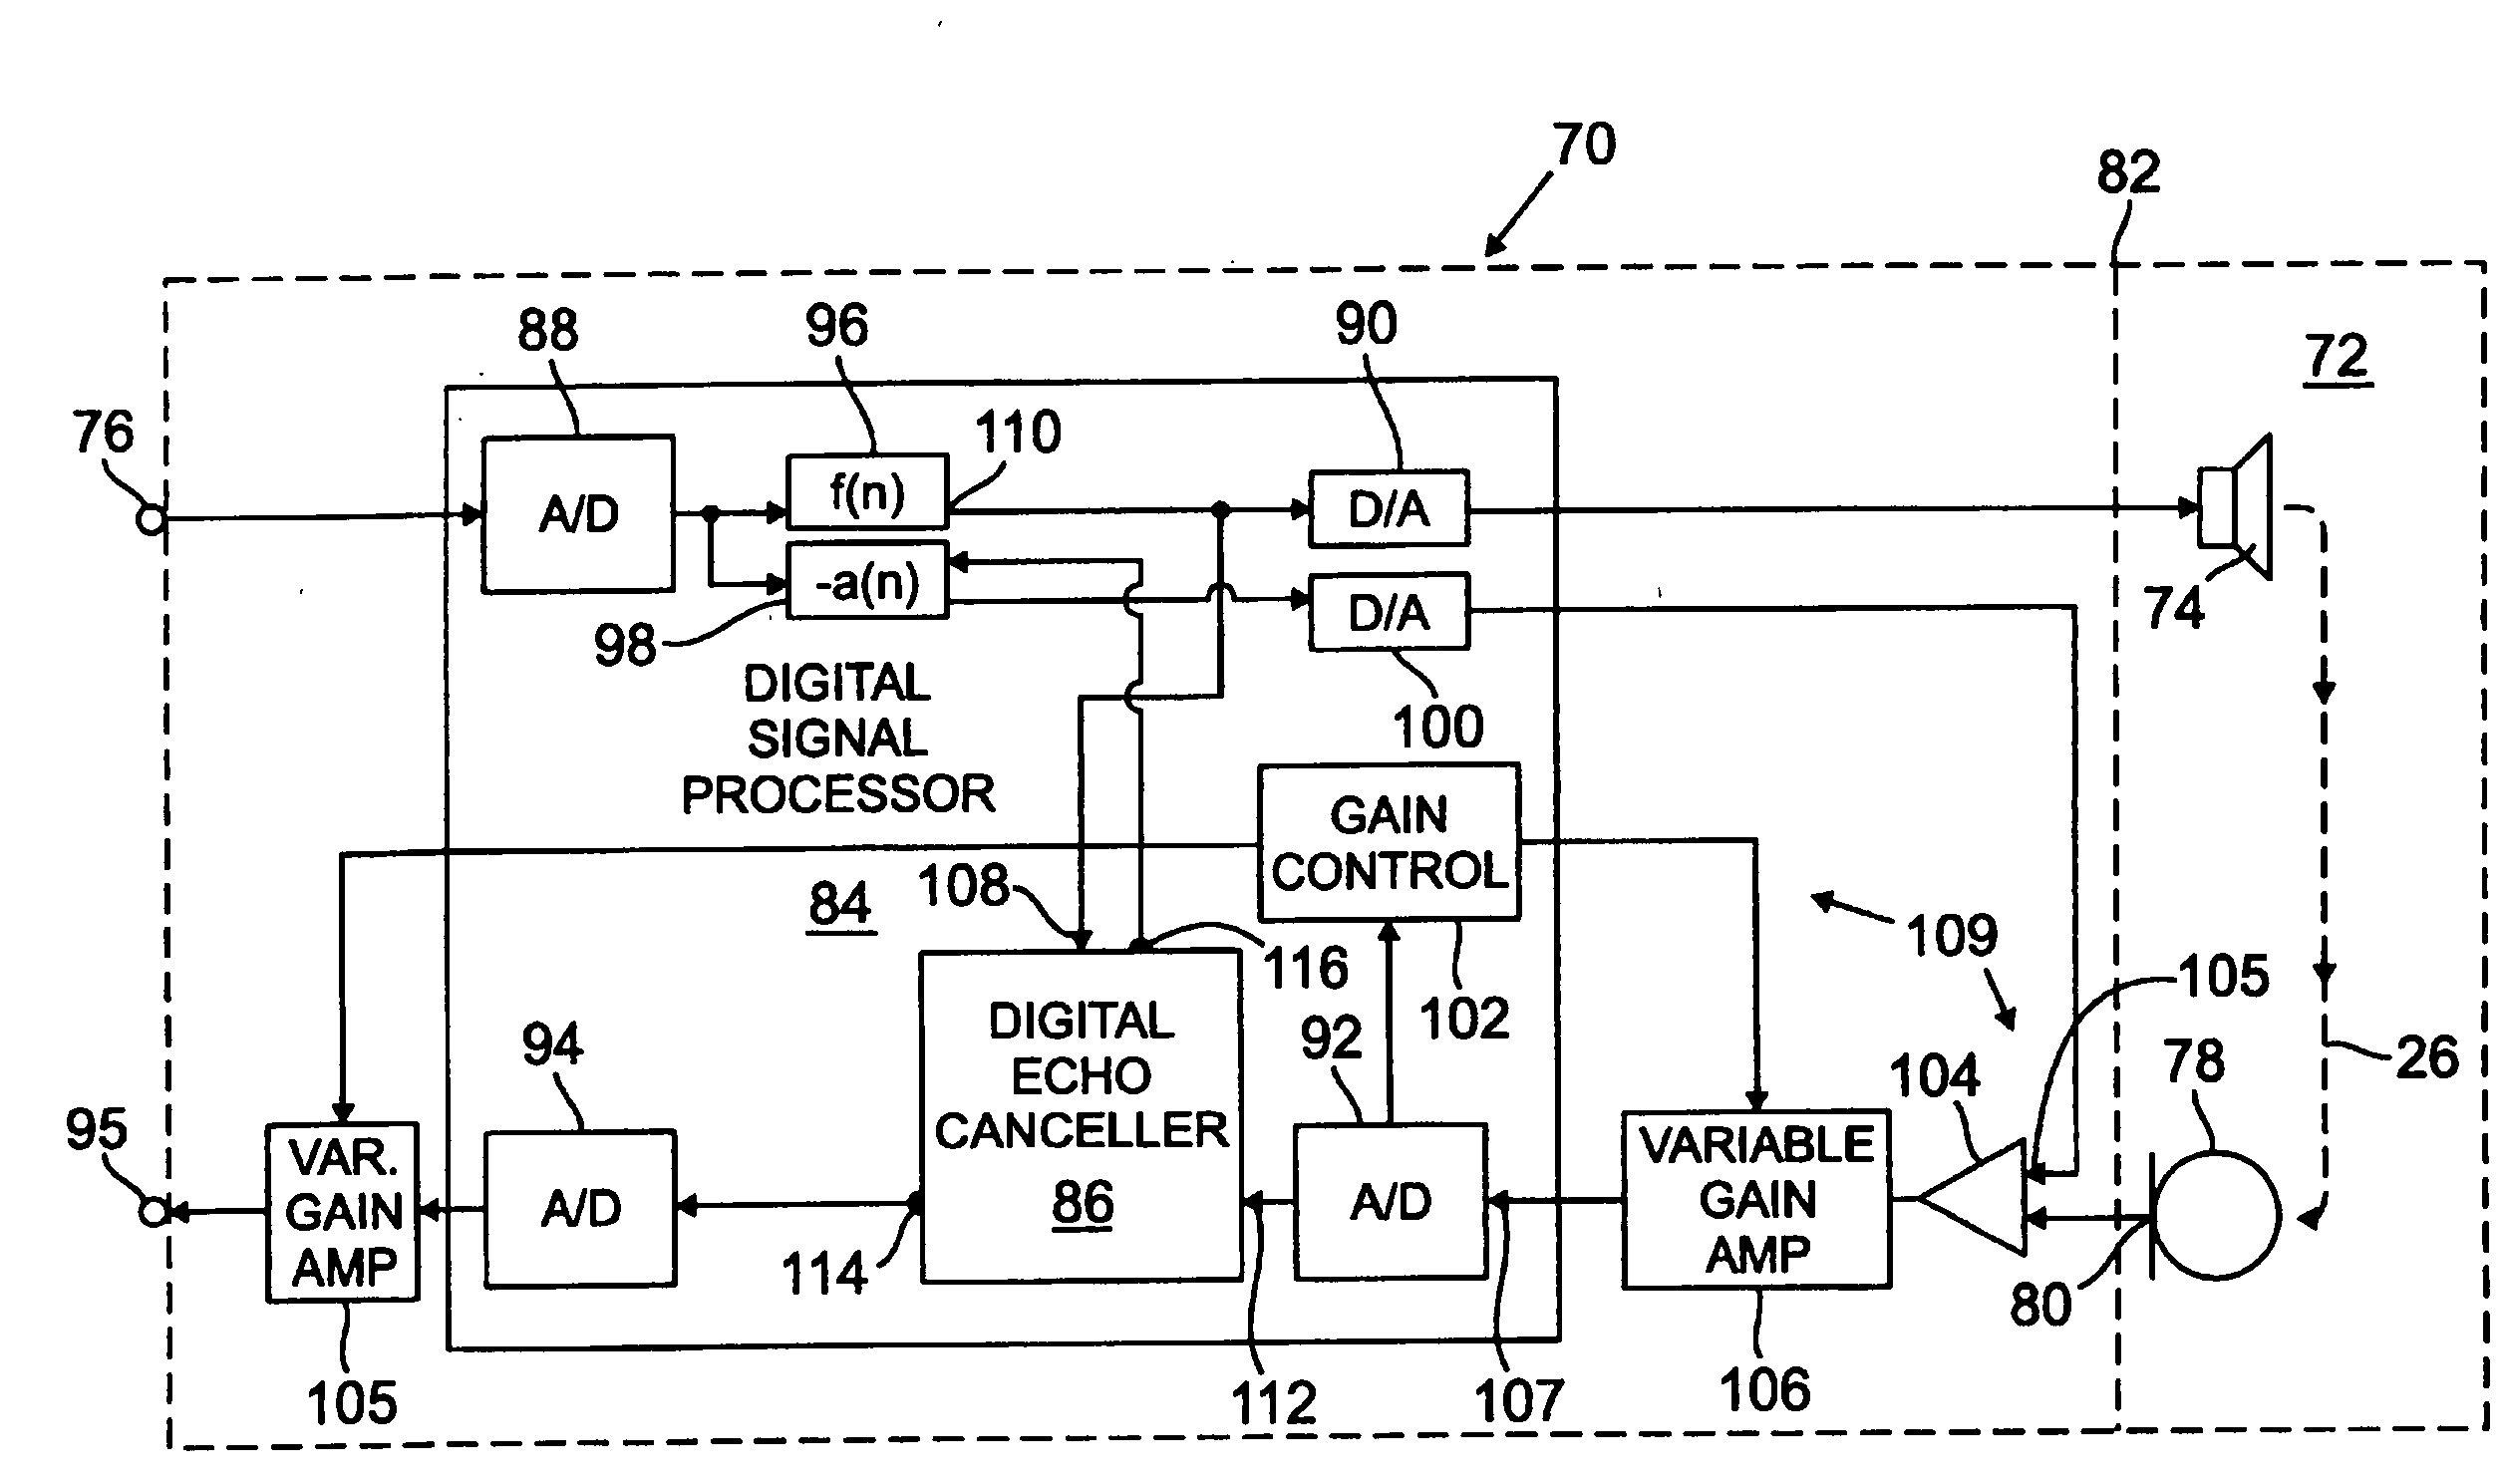 Reduction in acoustic coupling in communication systems and appliances using multiple microphones